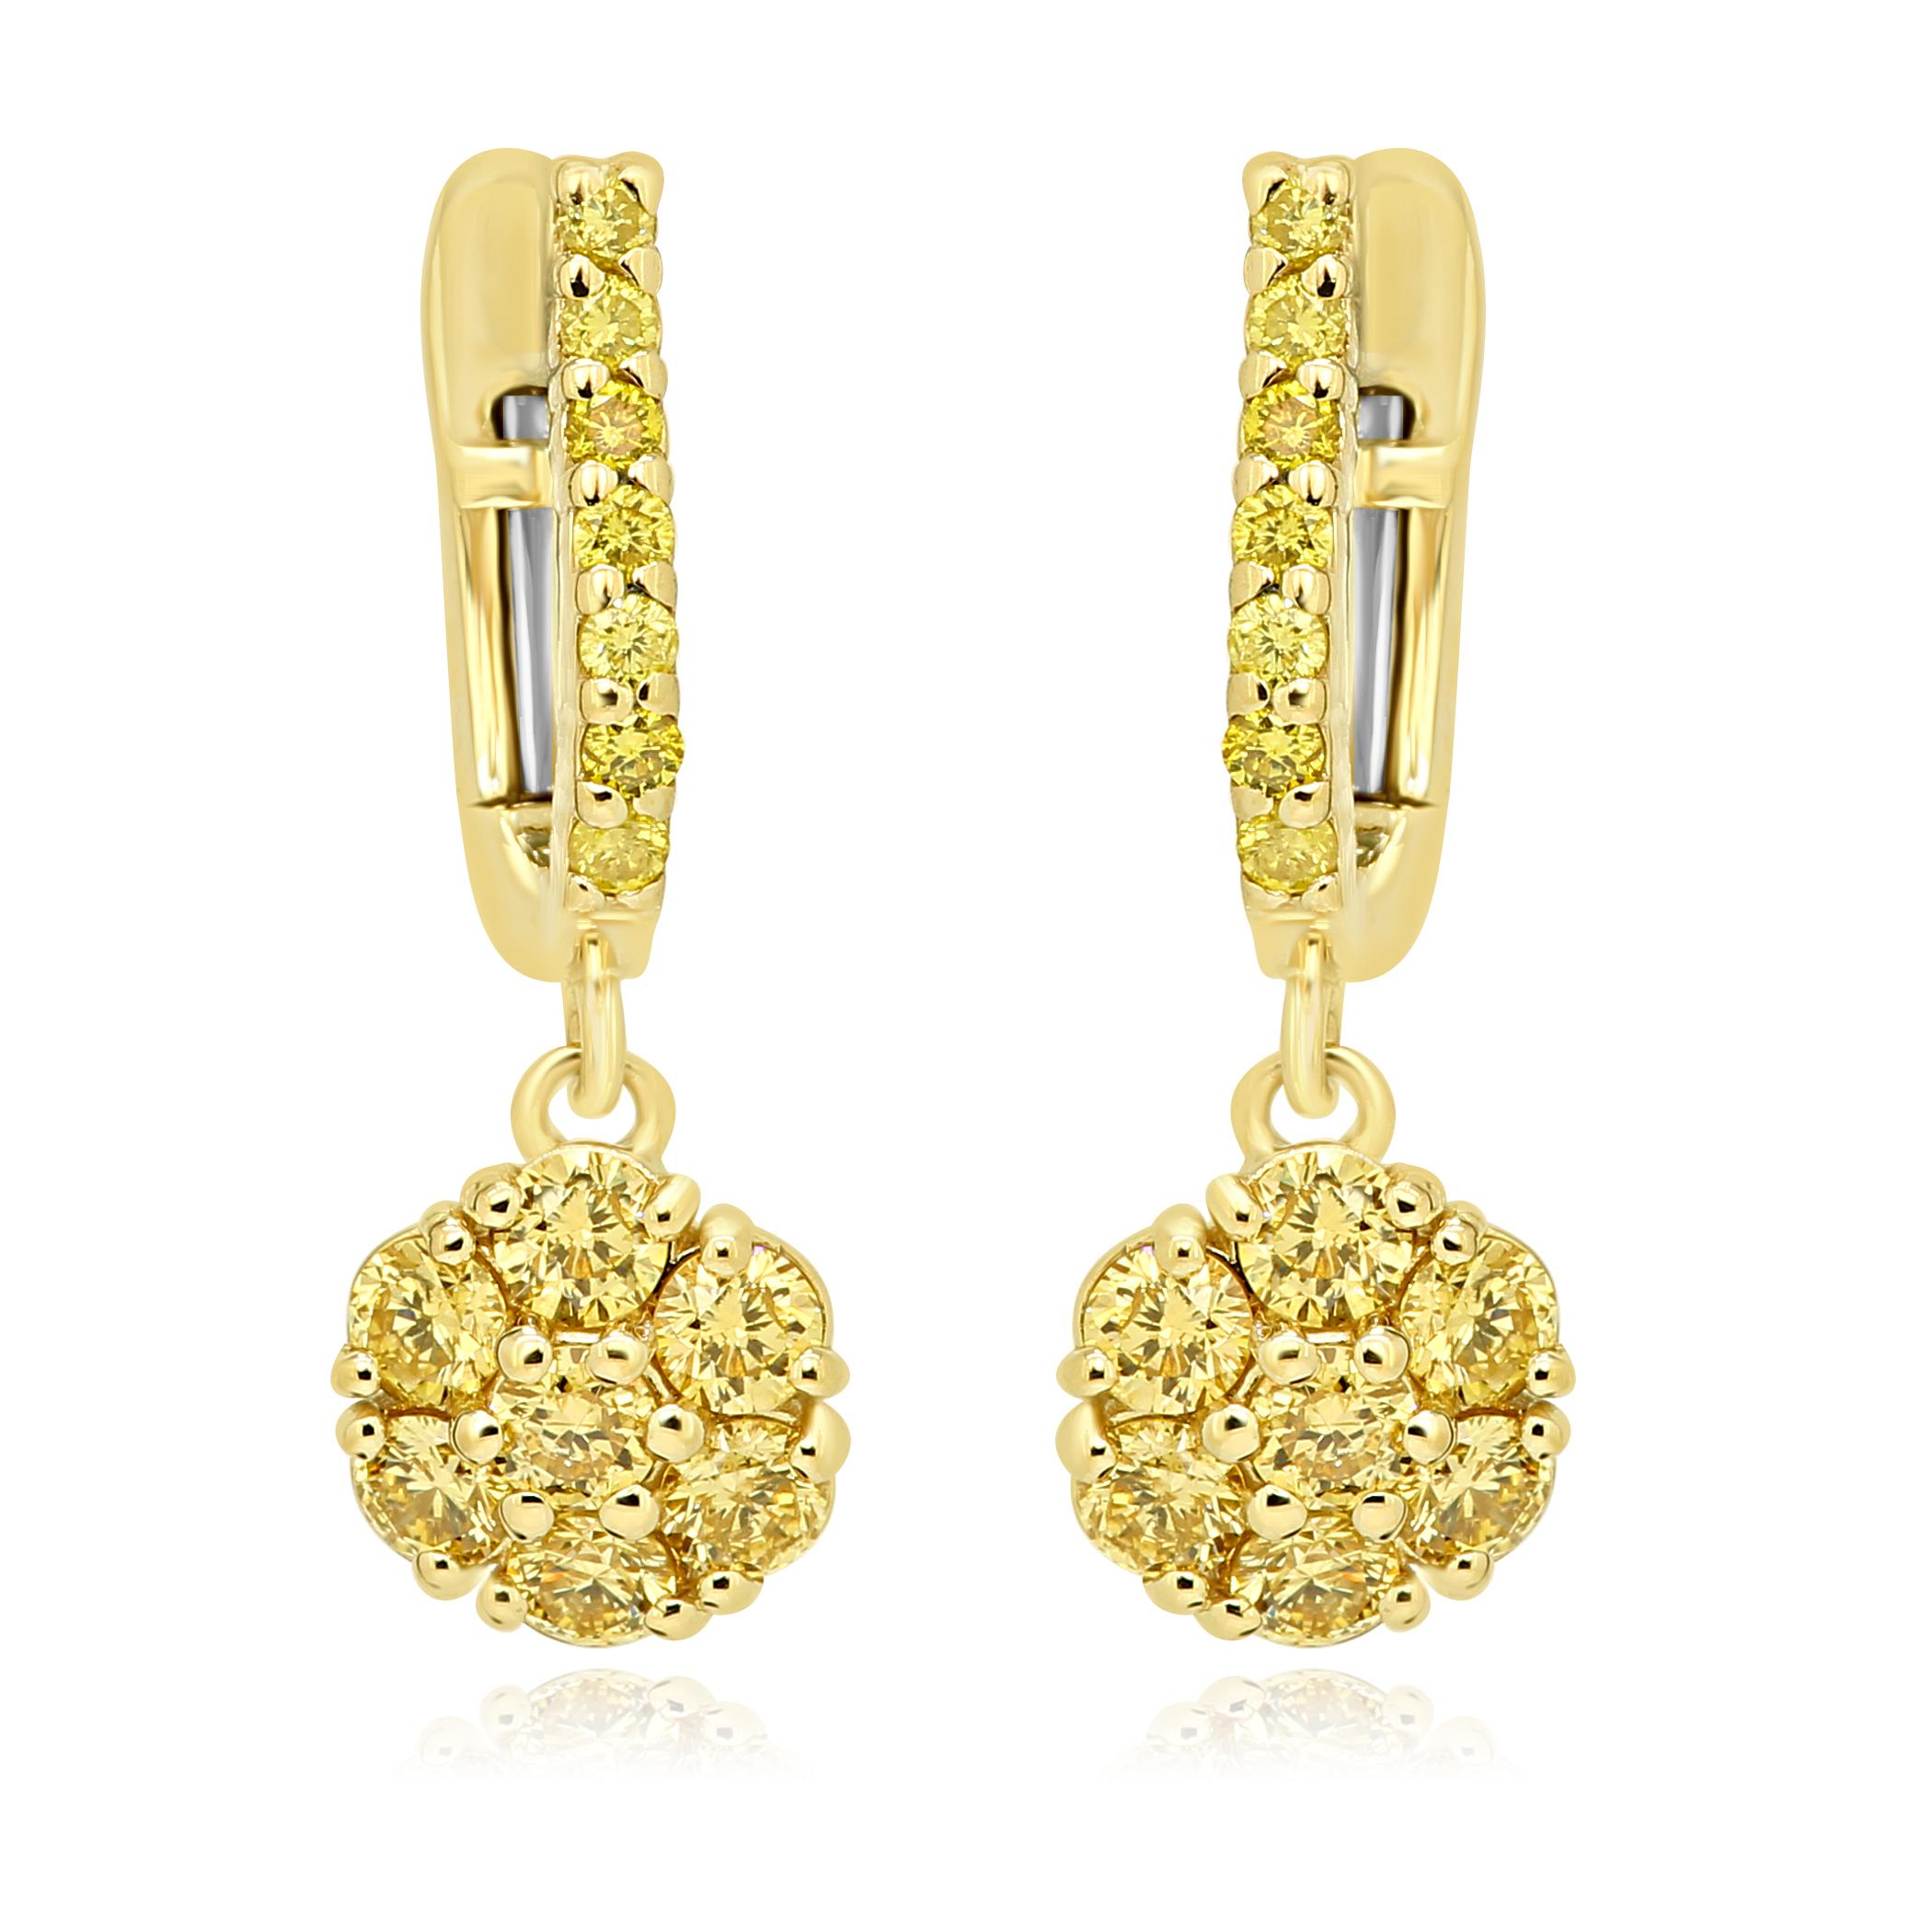 Stunning Natural Fancy Yellow Diamond Round 1.18 Carat set in Cluster style making it look like one big Diamond in 14K Yellow Gold Dangle Clip on Earring.

Style available in different price ranges. Prices are based on your selection of 4C's Cut,